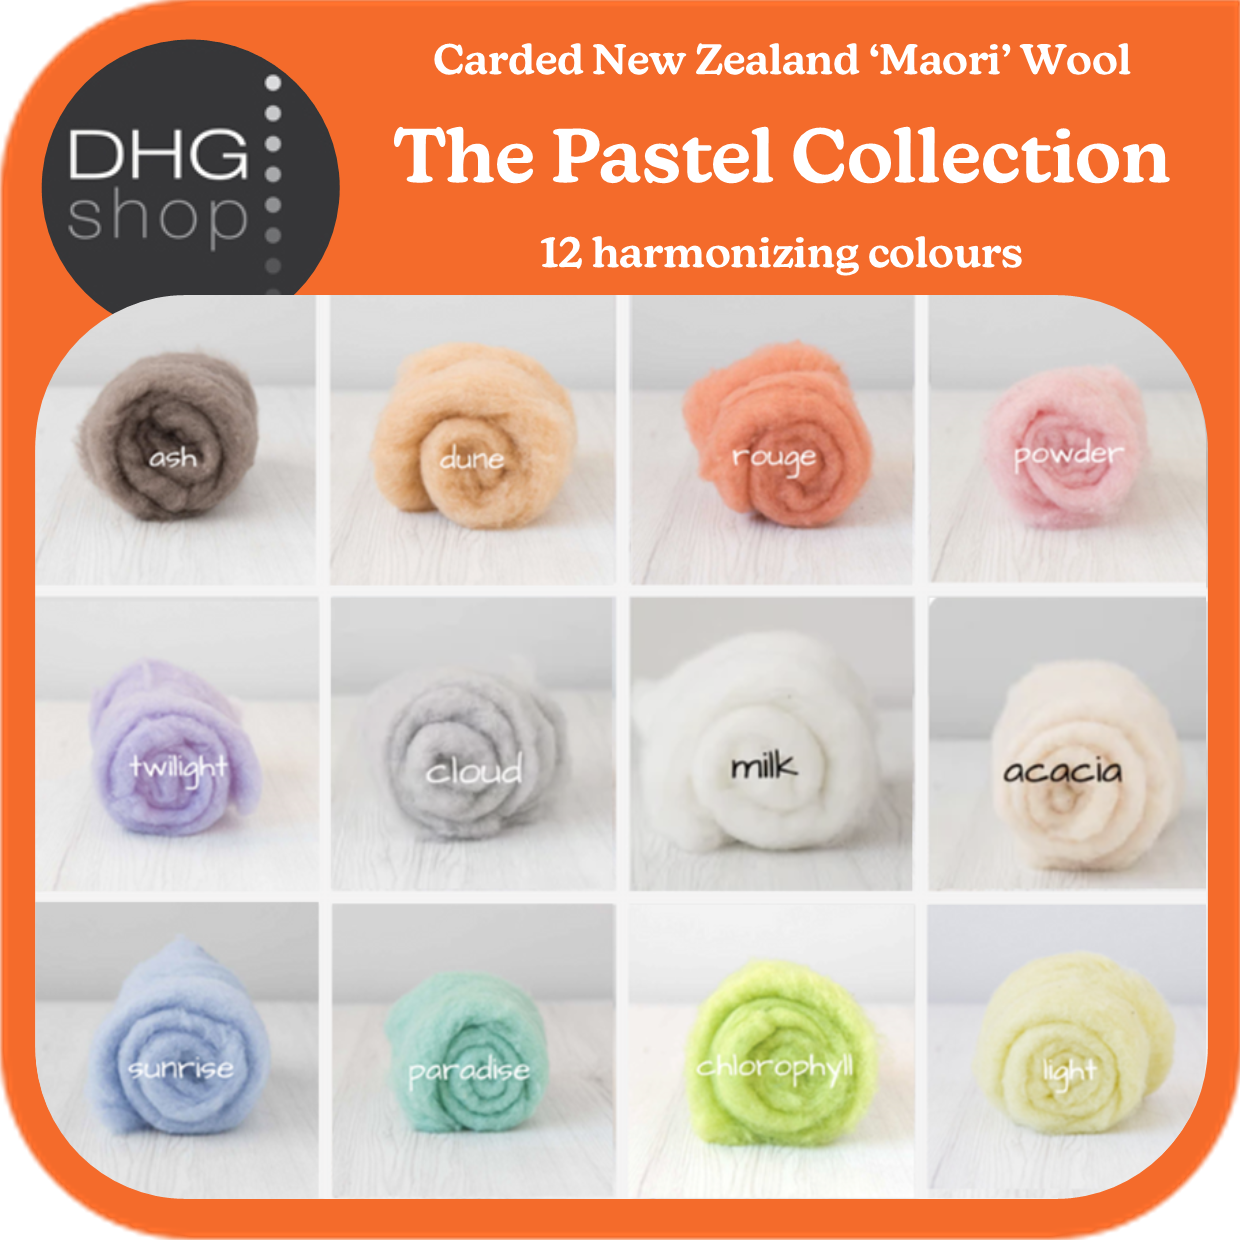 The Pastel Collection - Carded New Zealand Wool DHG 'Maori' Batts